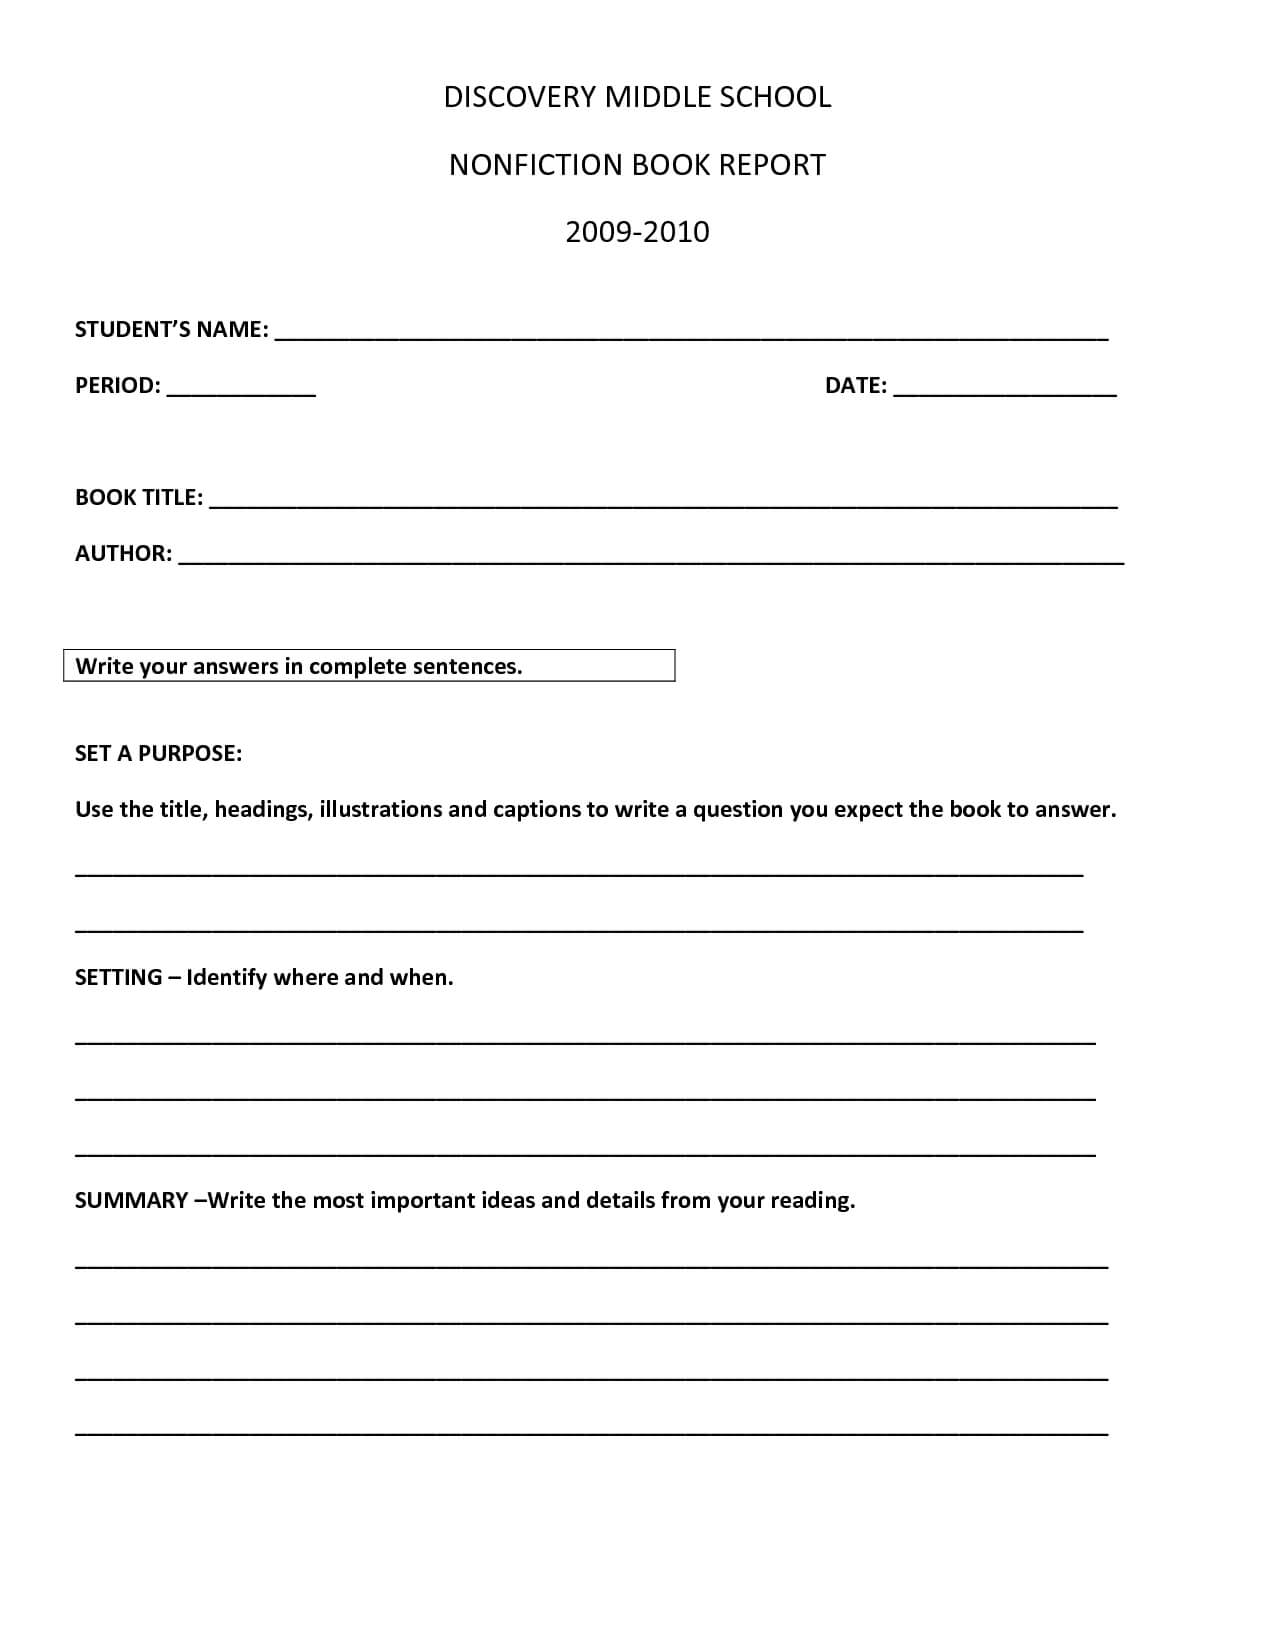 Book Report Template | Discovery Middle School Nonfiction Inside High School Book Report Template